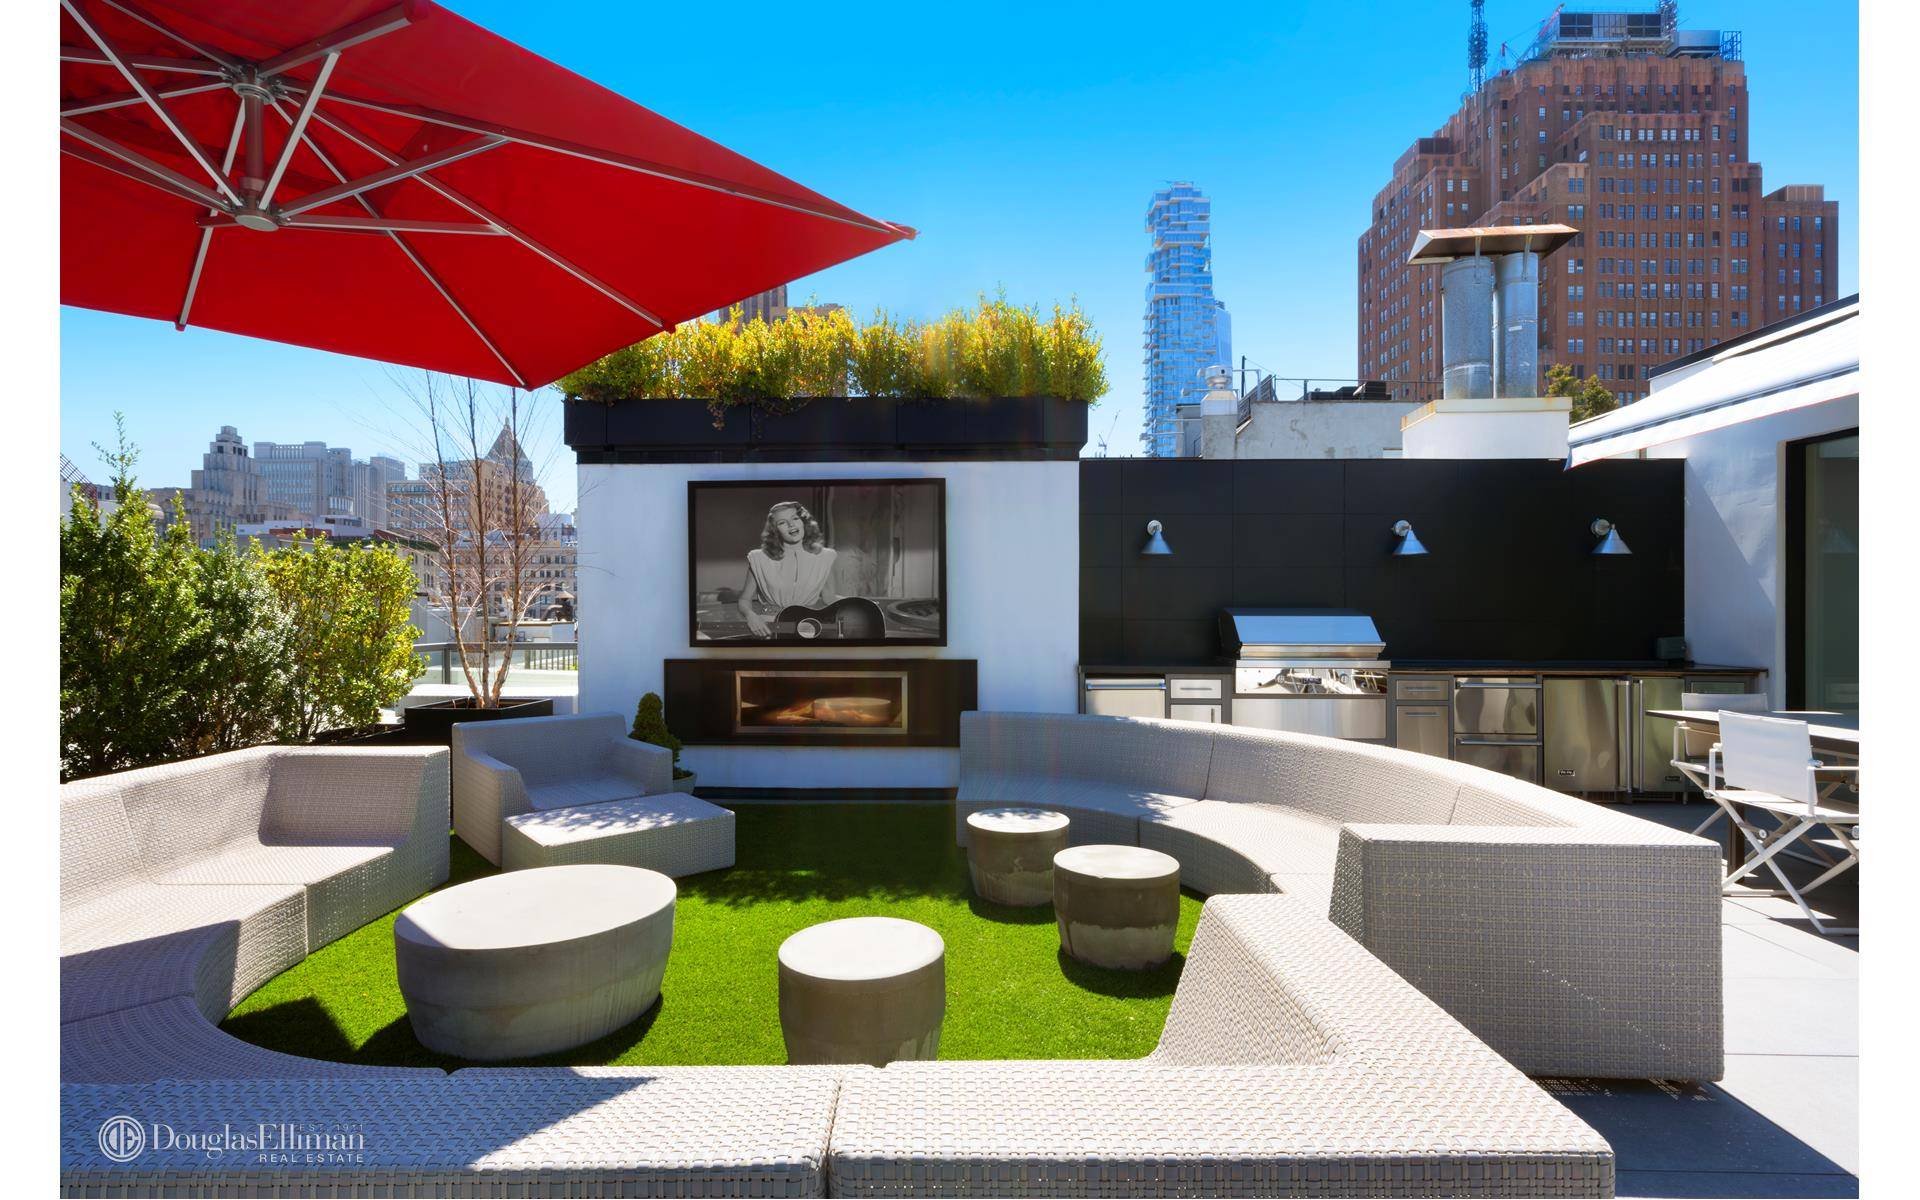 Introducing a one of a kind duplex penthouse with two private outdoor rooftop terraces in a boutique condo within the fabled SoHo Cast Iron Historic District.